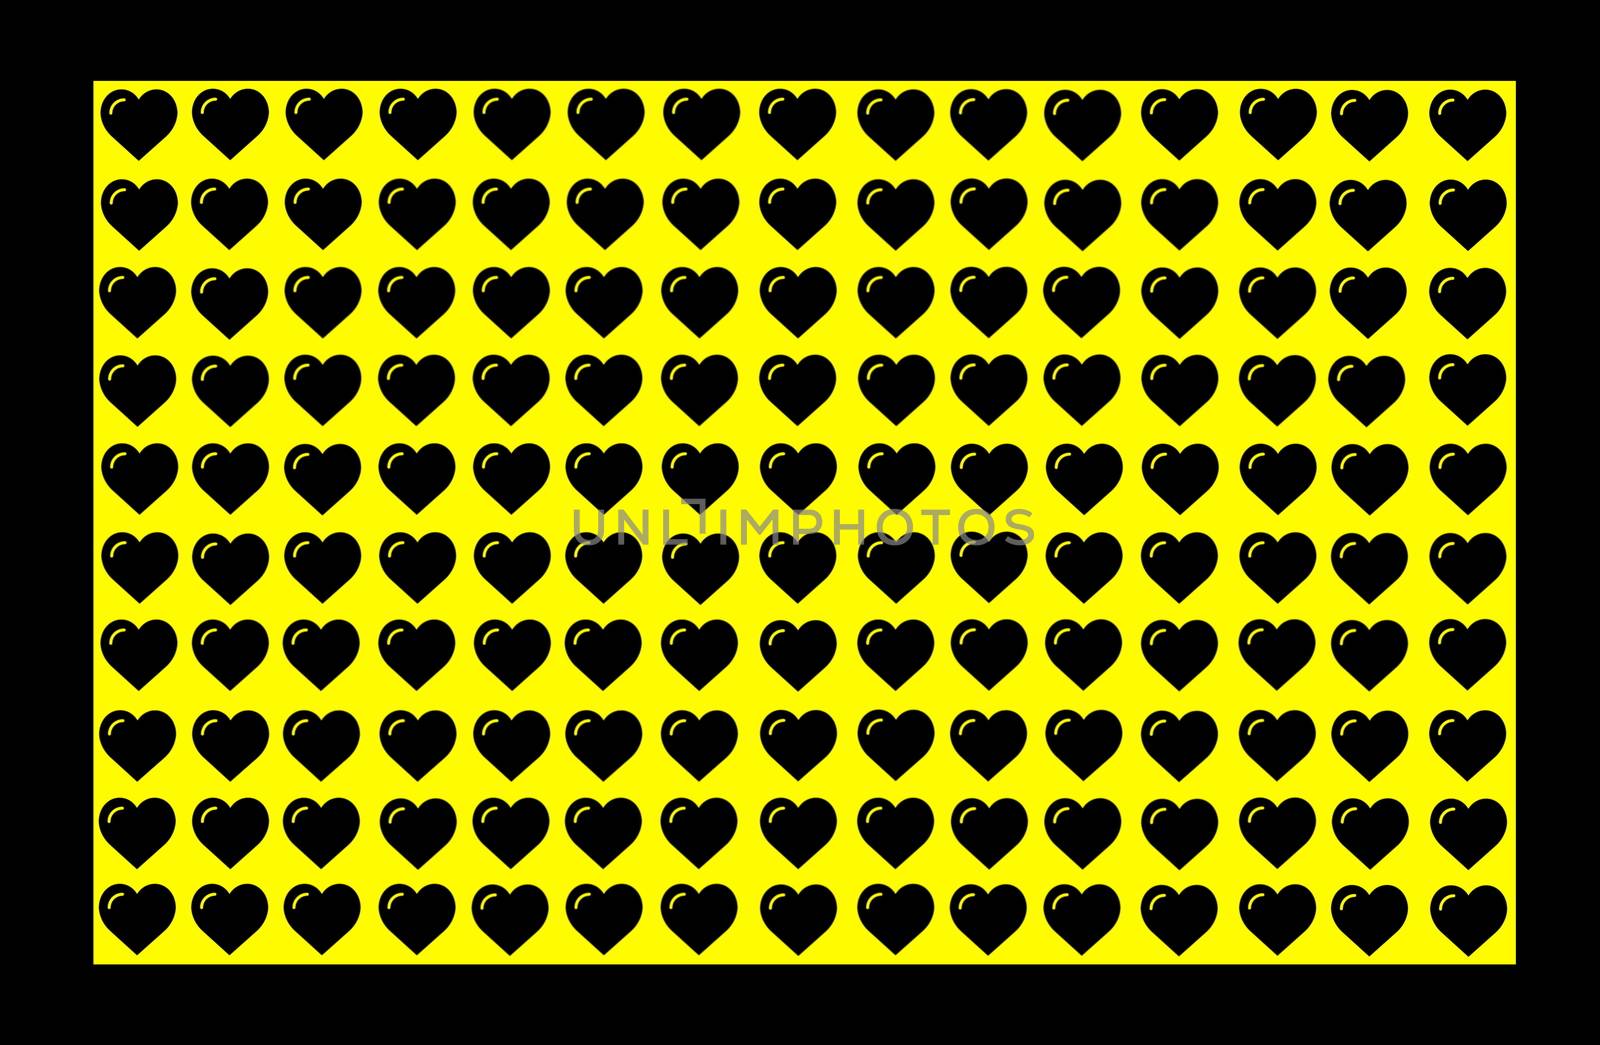 Black Heart Shape on Yellow Background with Black Border. Hearts Dot Design. Can be used for Illustration purpose, background, website, businesses, presentations, Product Promotions etc.